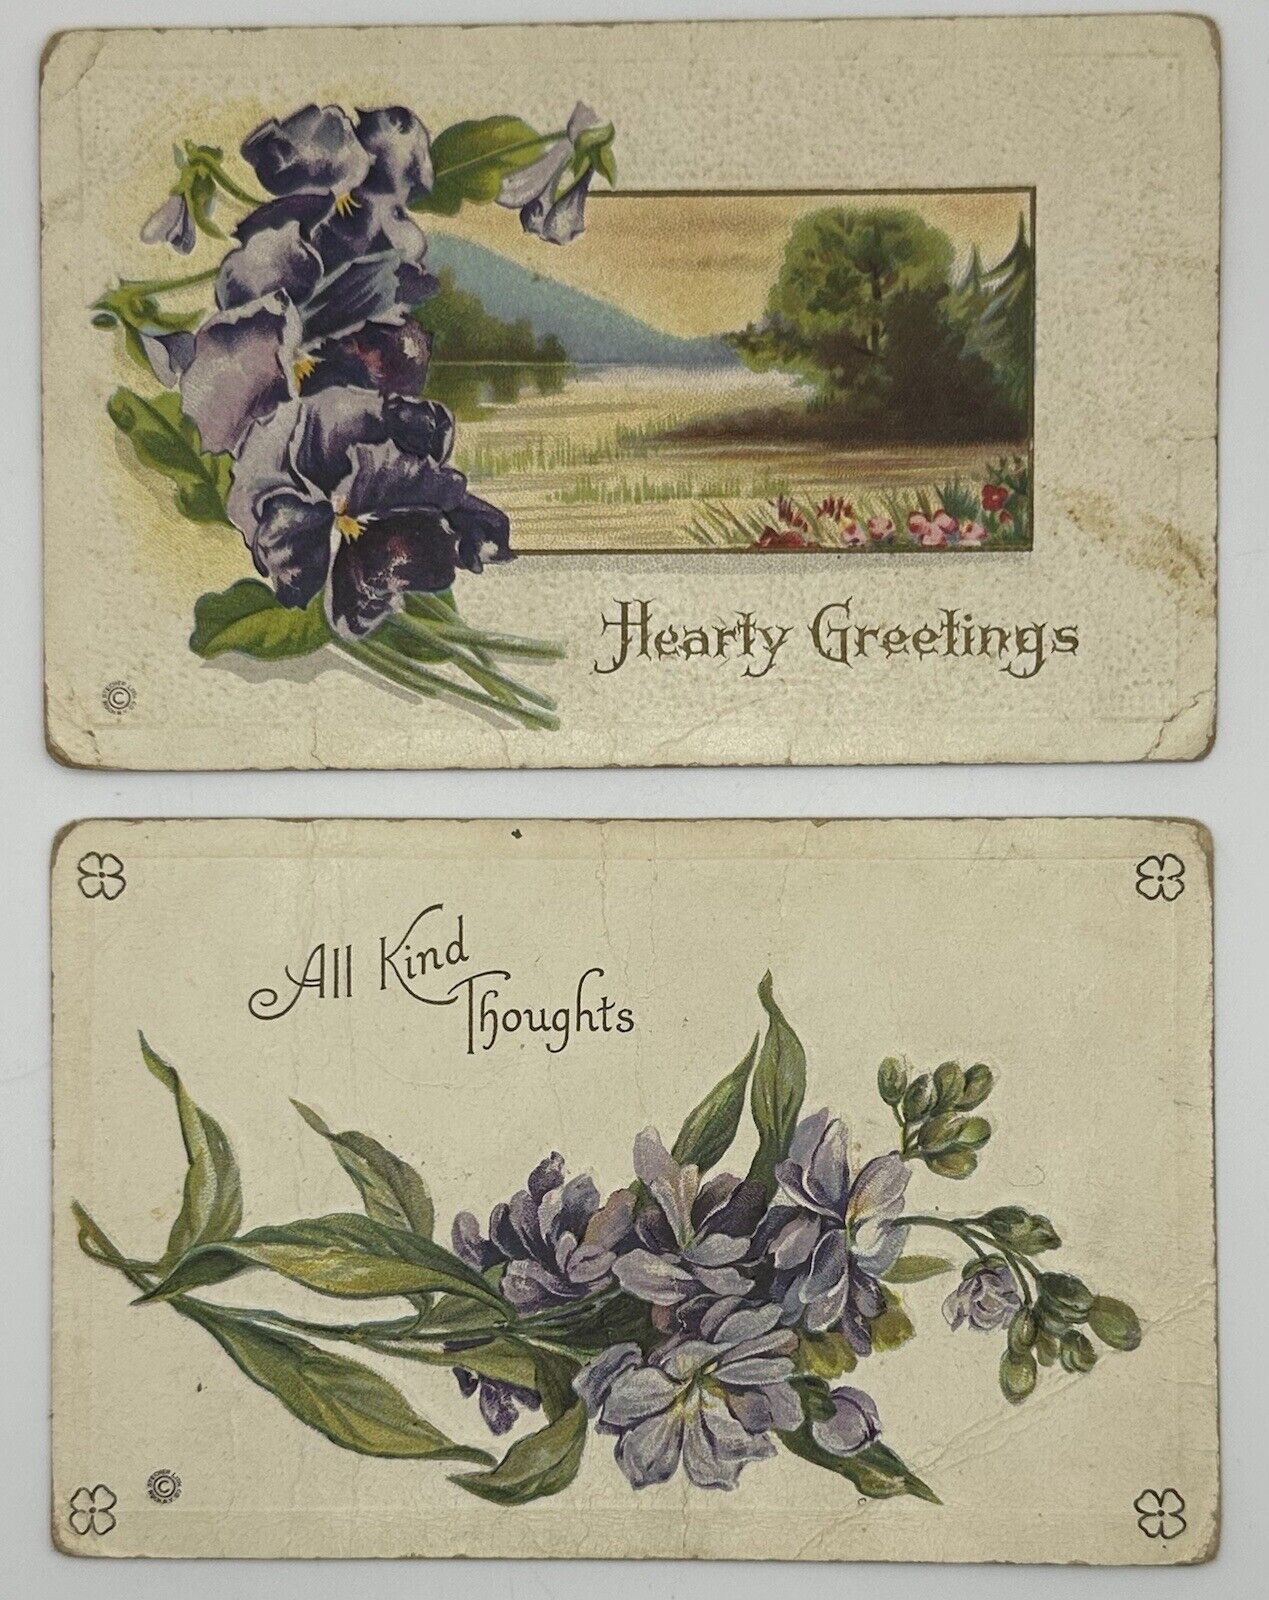 1907-1915 Greetings Postcard Lot Of 2 Purple Flowers All Kind Thoughts